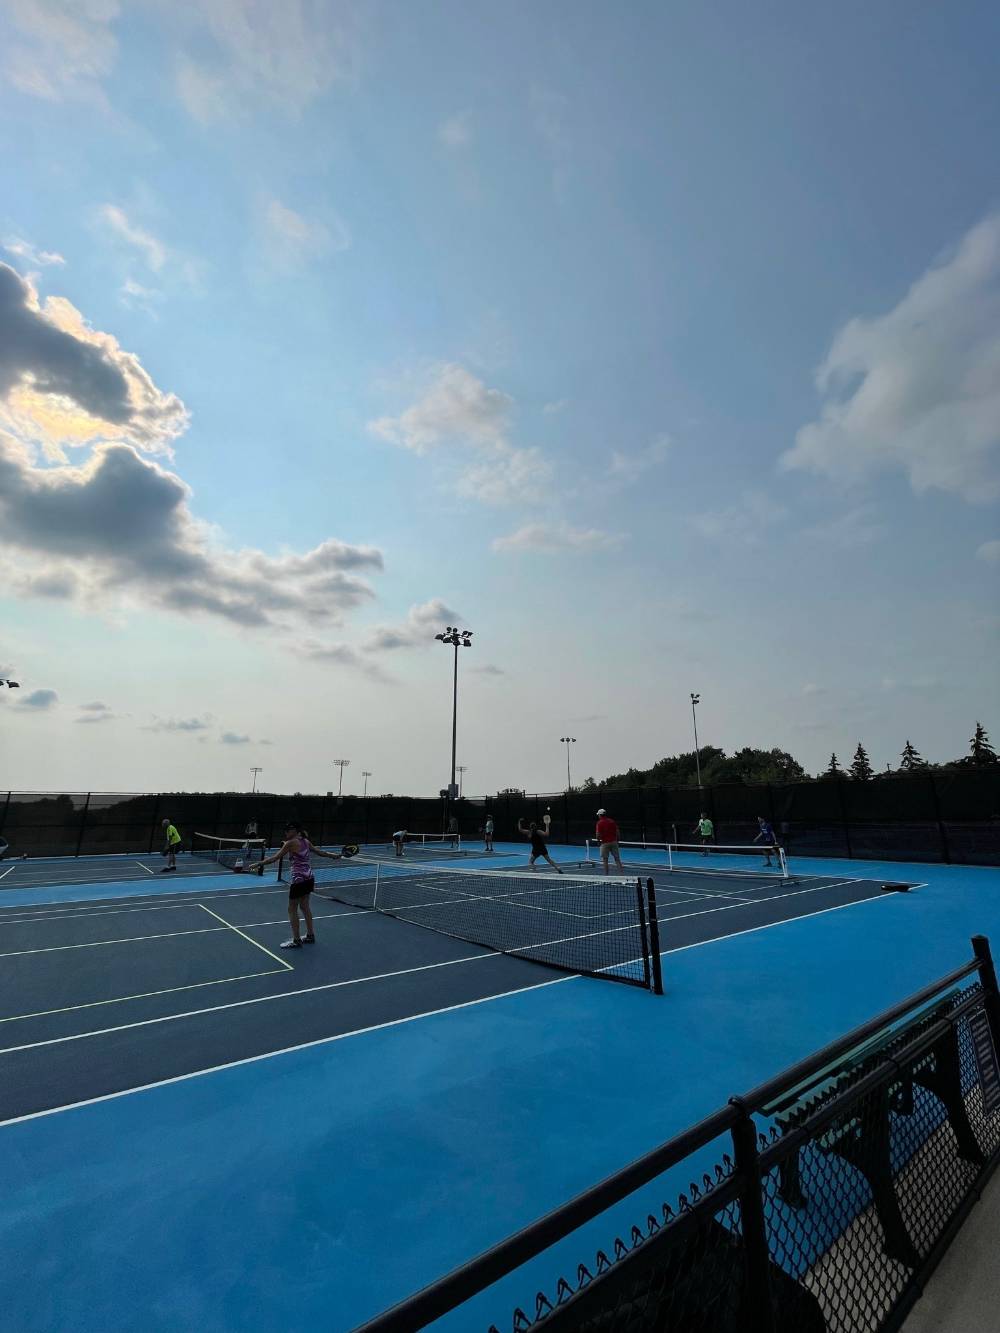 Tennis court and sky